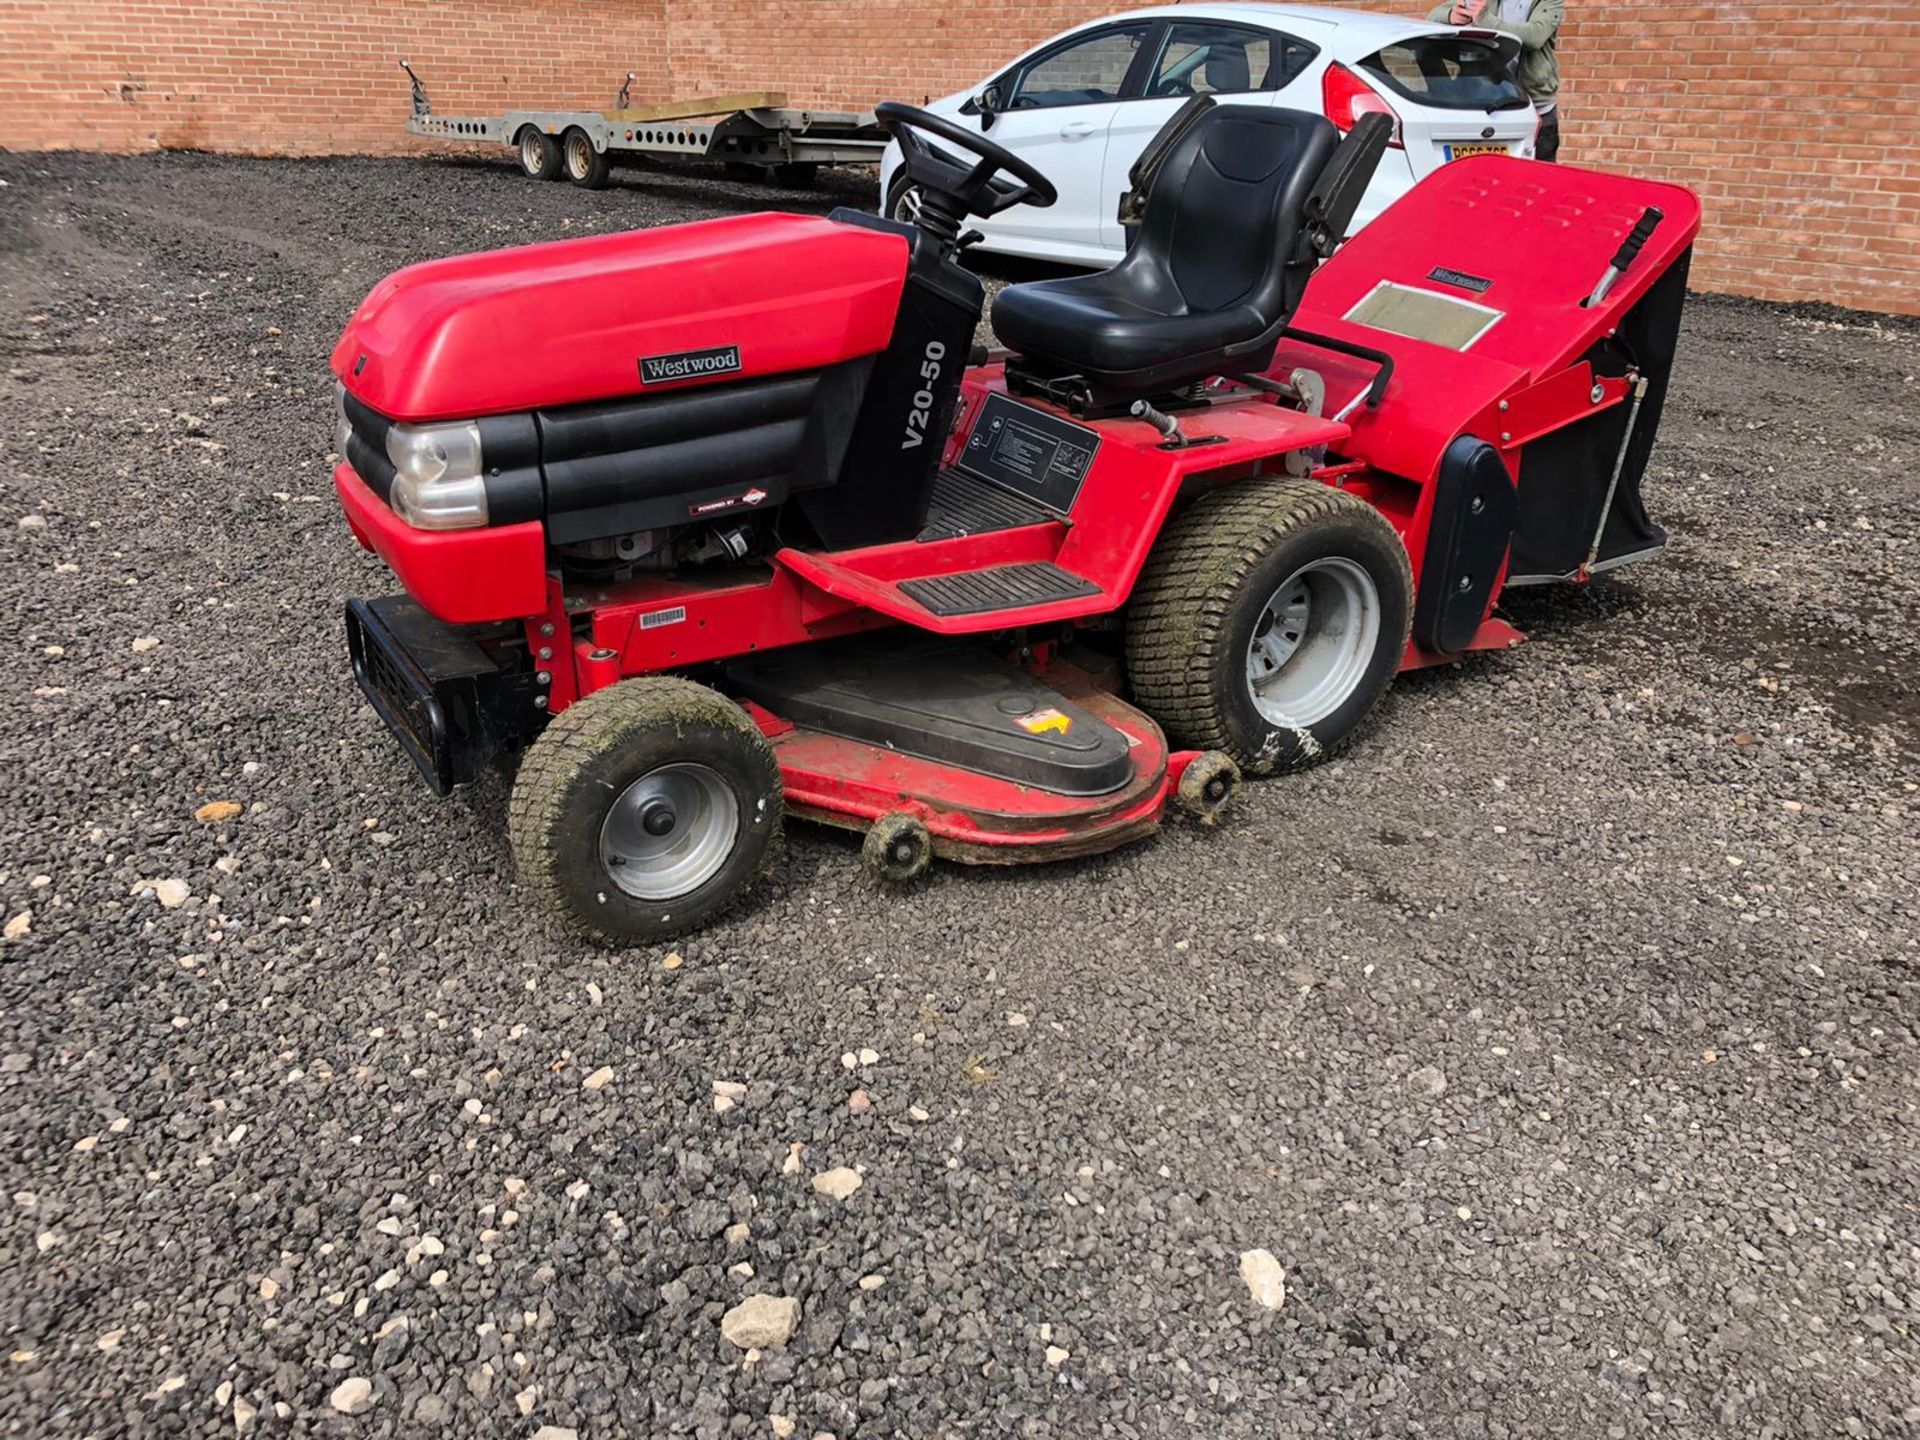 WESTWOOD V20-50 RIDE ON MOWER, STARTS DRIVES AND CUTS, SELLING DUE TO DOWNSIZING *NO VAT* - Image 4 of 6